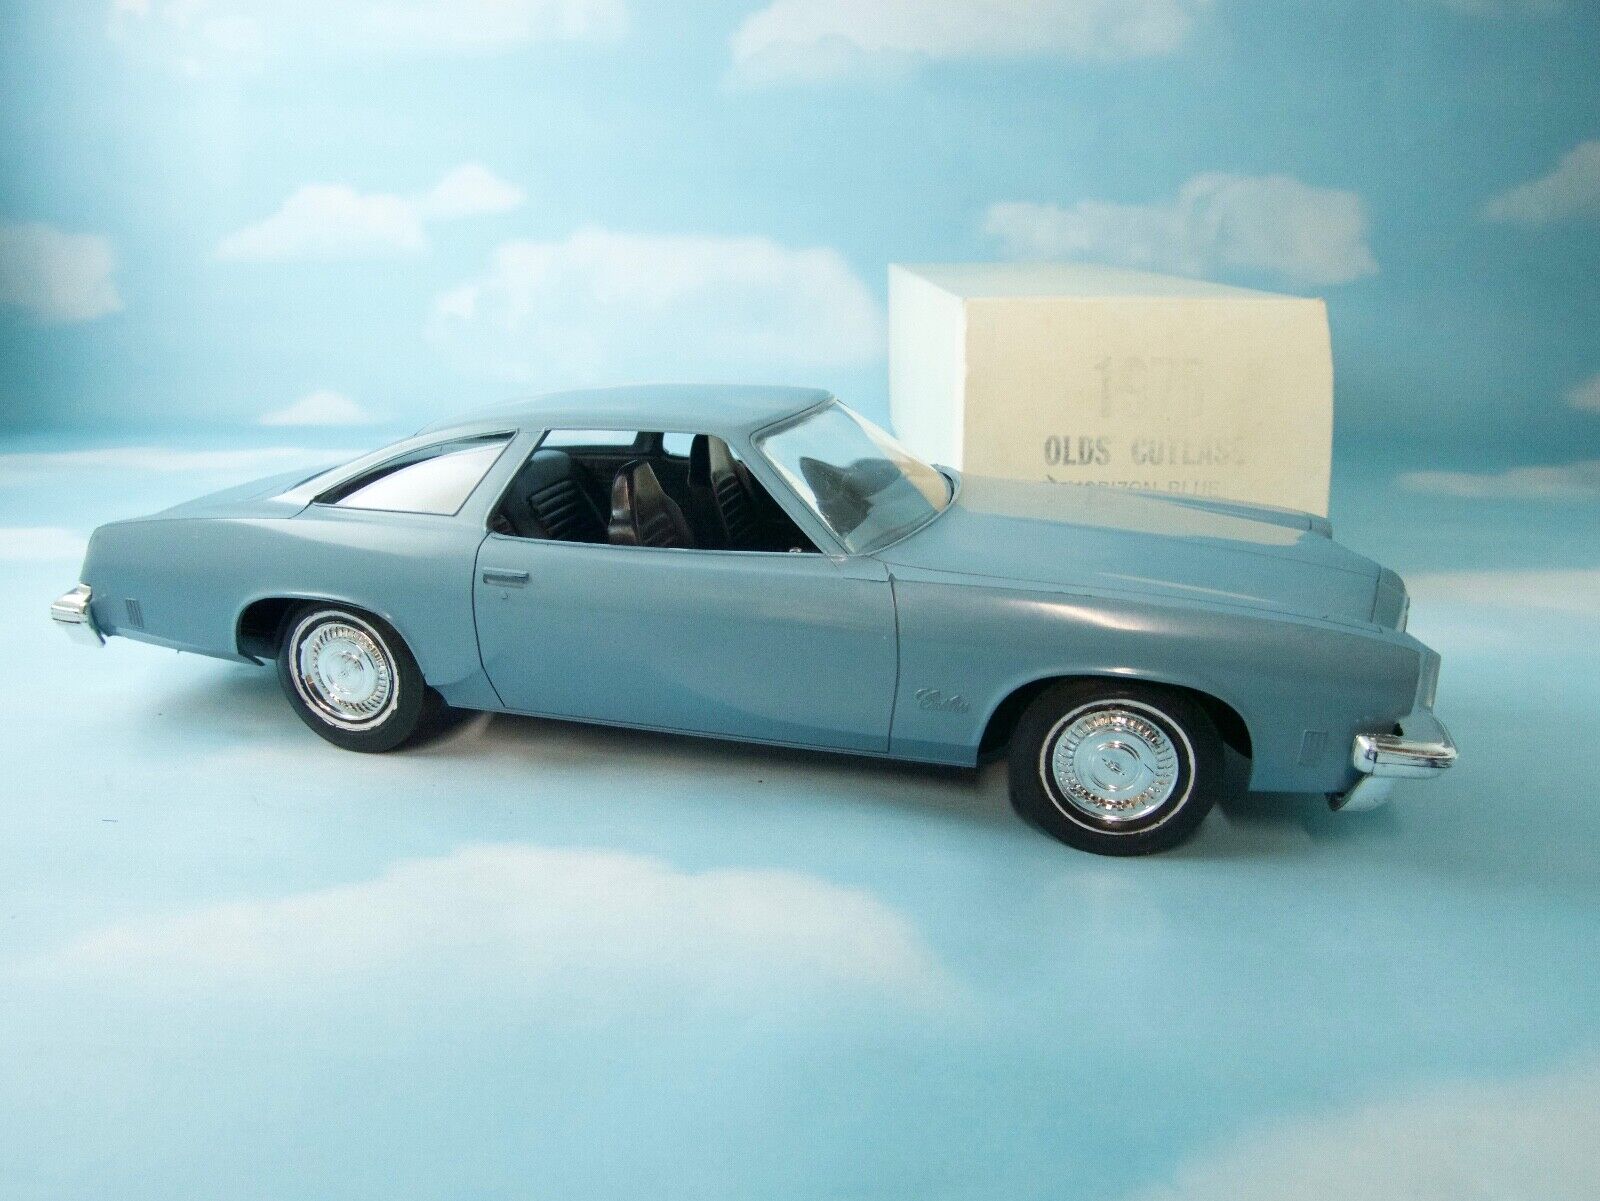 1975 overseas Limited time sale Olds Cutlass promo model in original box Blue and factory Horizon color